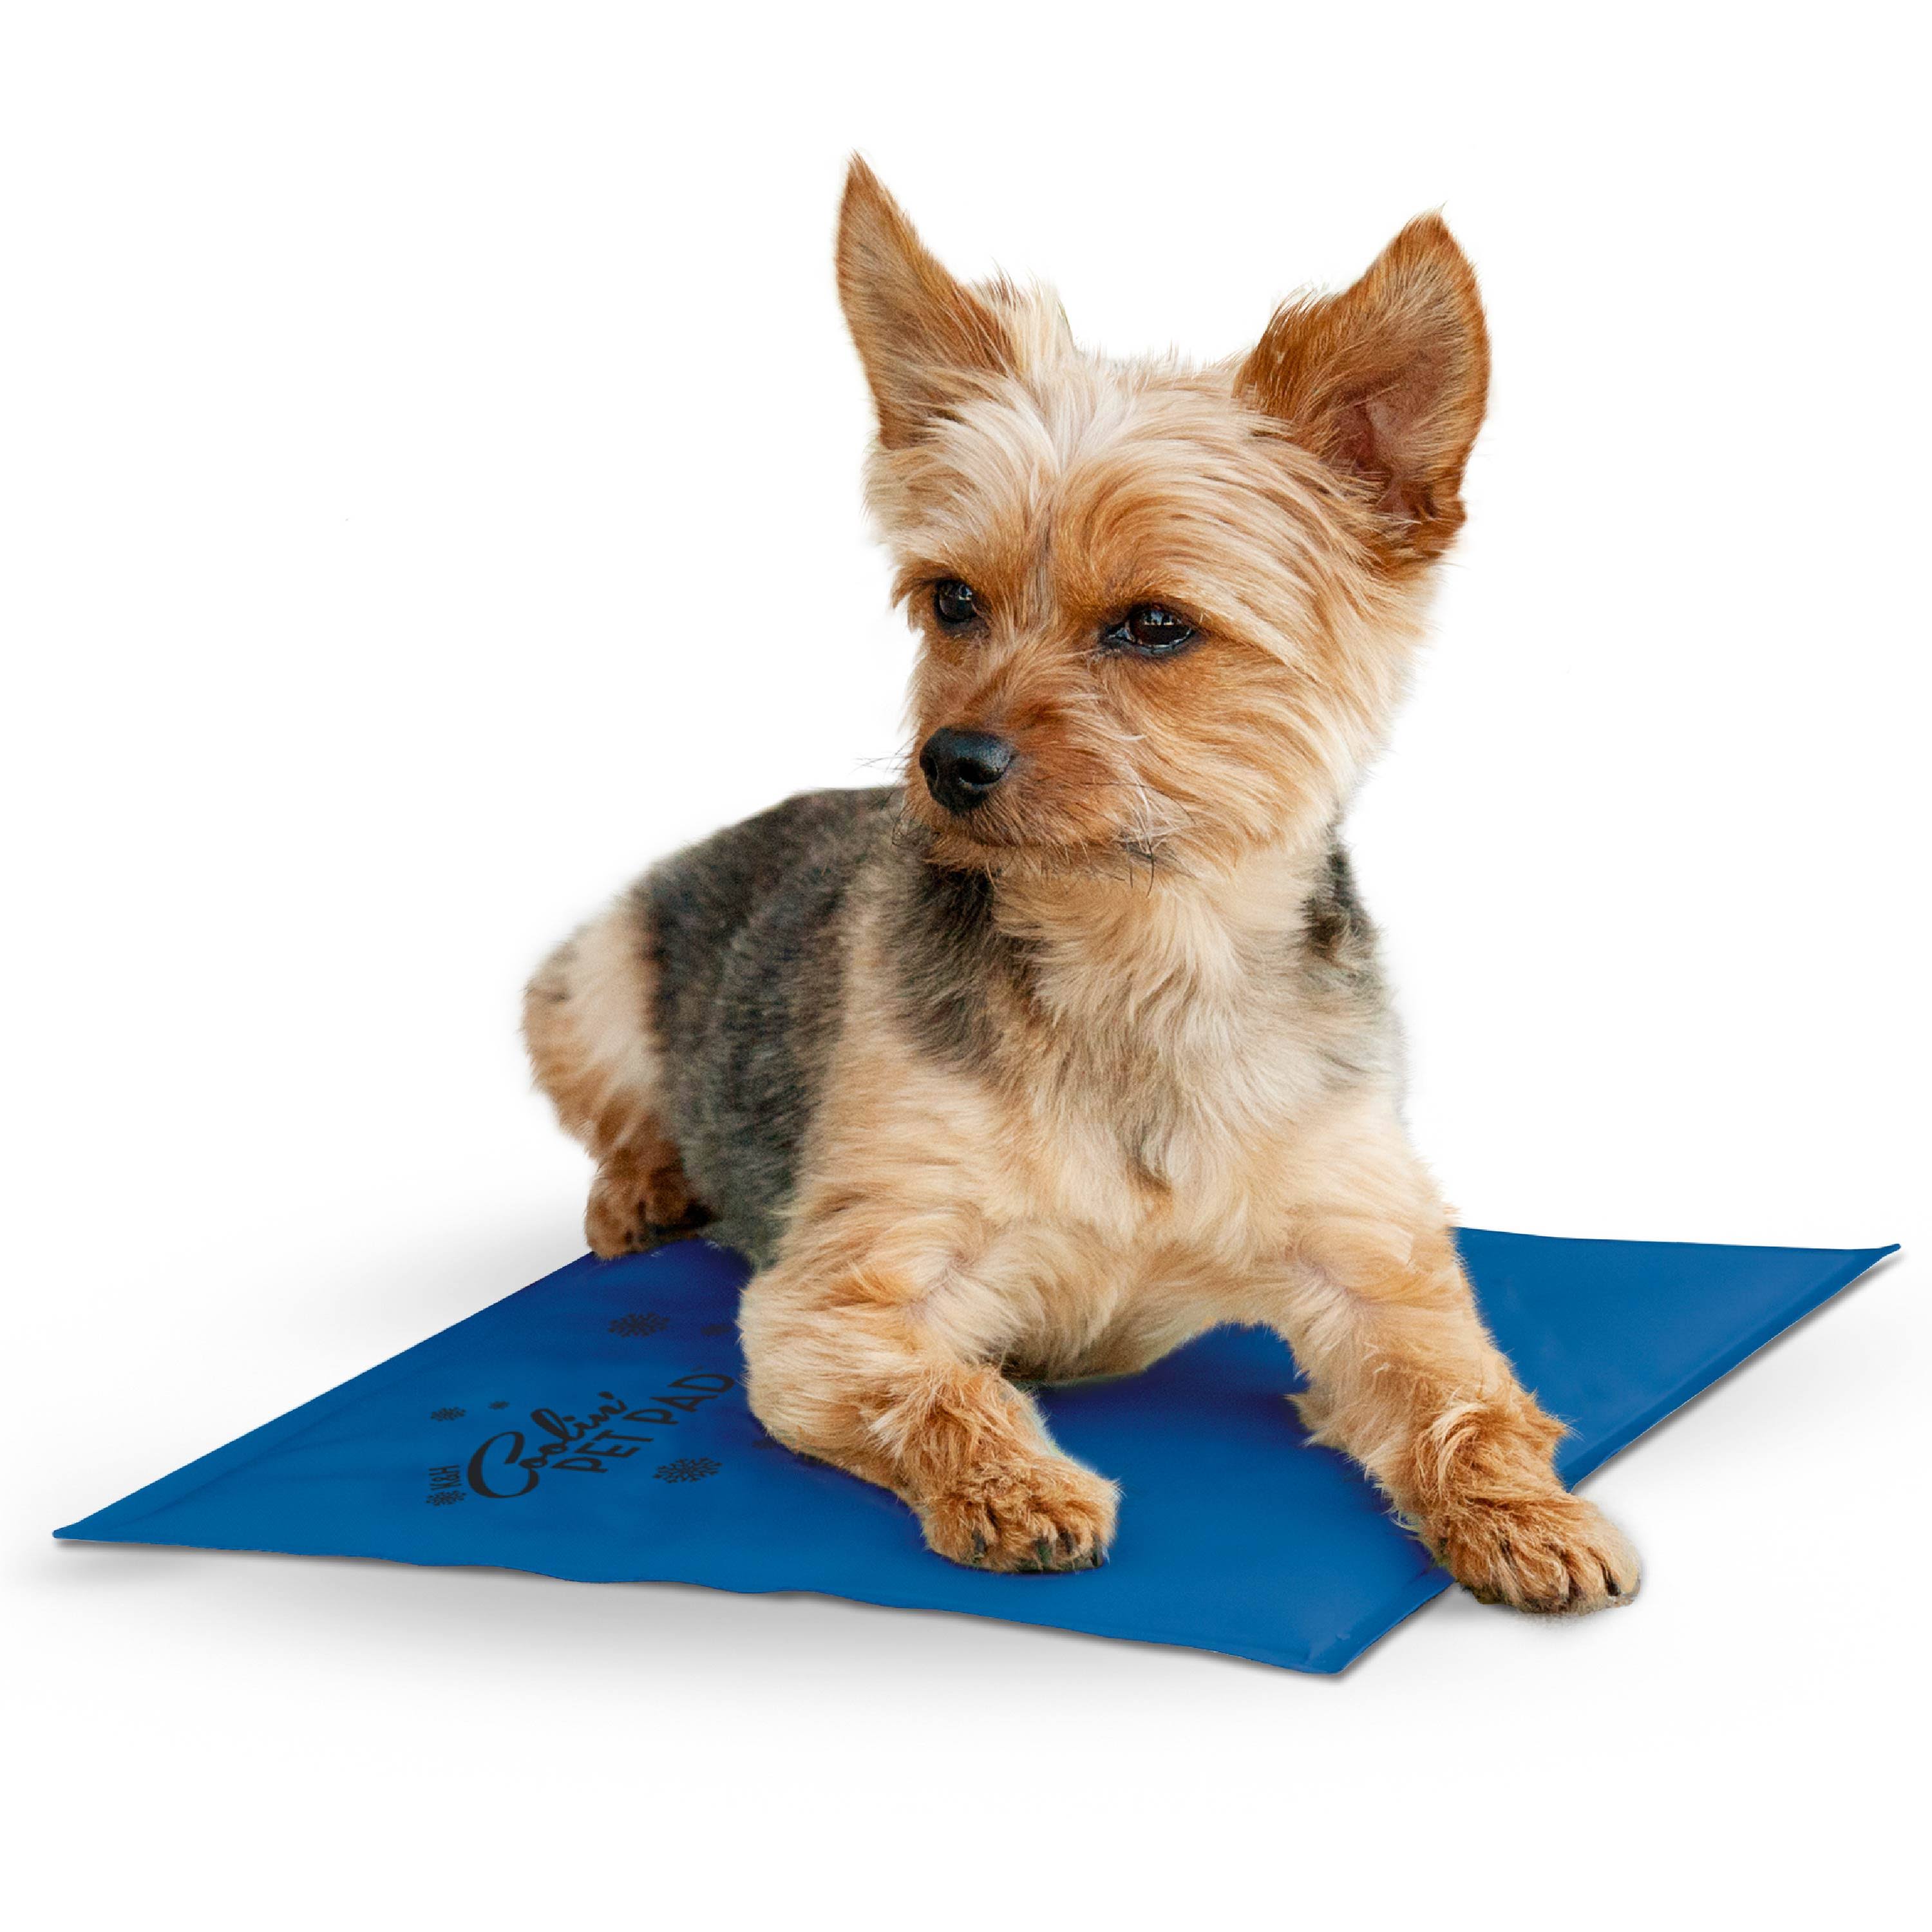 K&H Coolin' Pet Pad for Dog, Small Blue Small 11 x 15 Inches